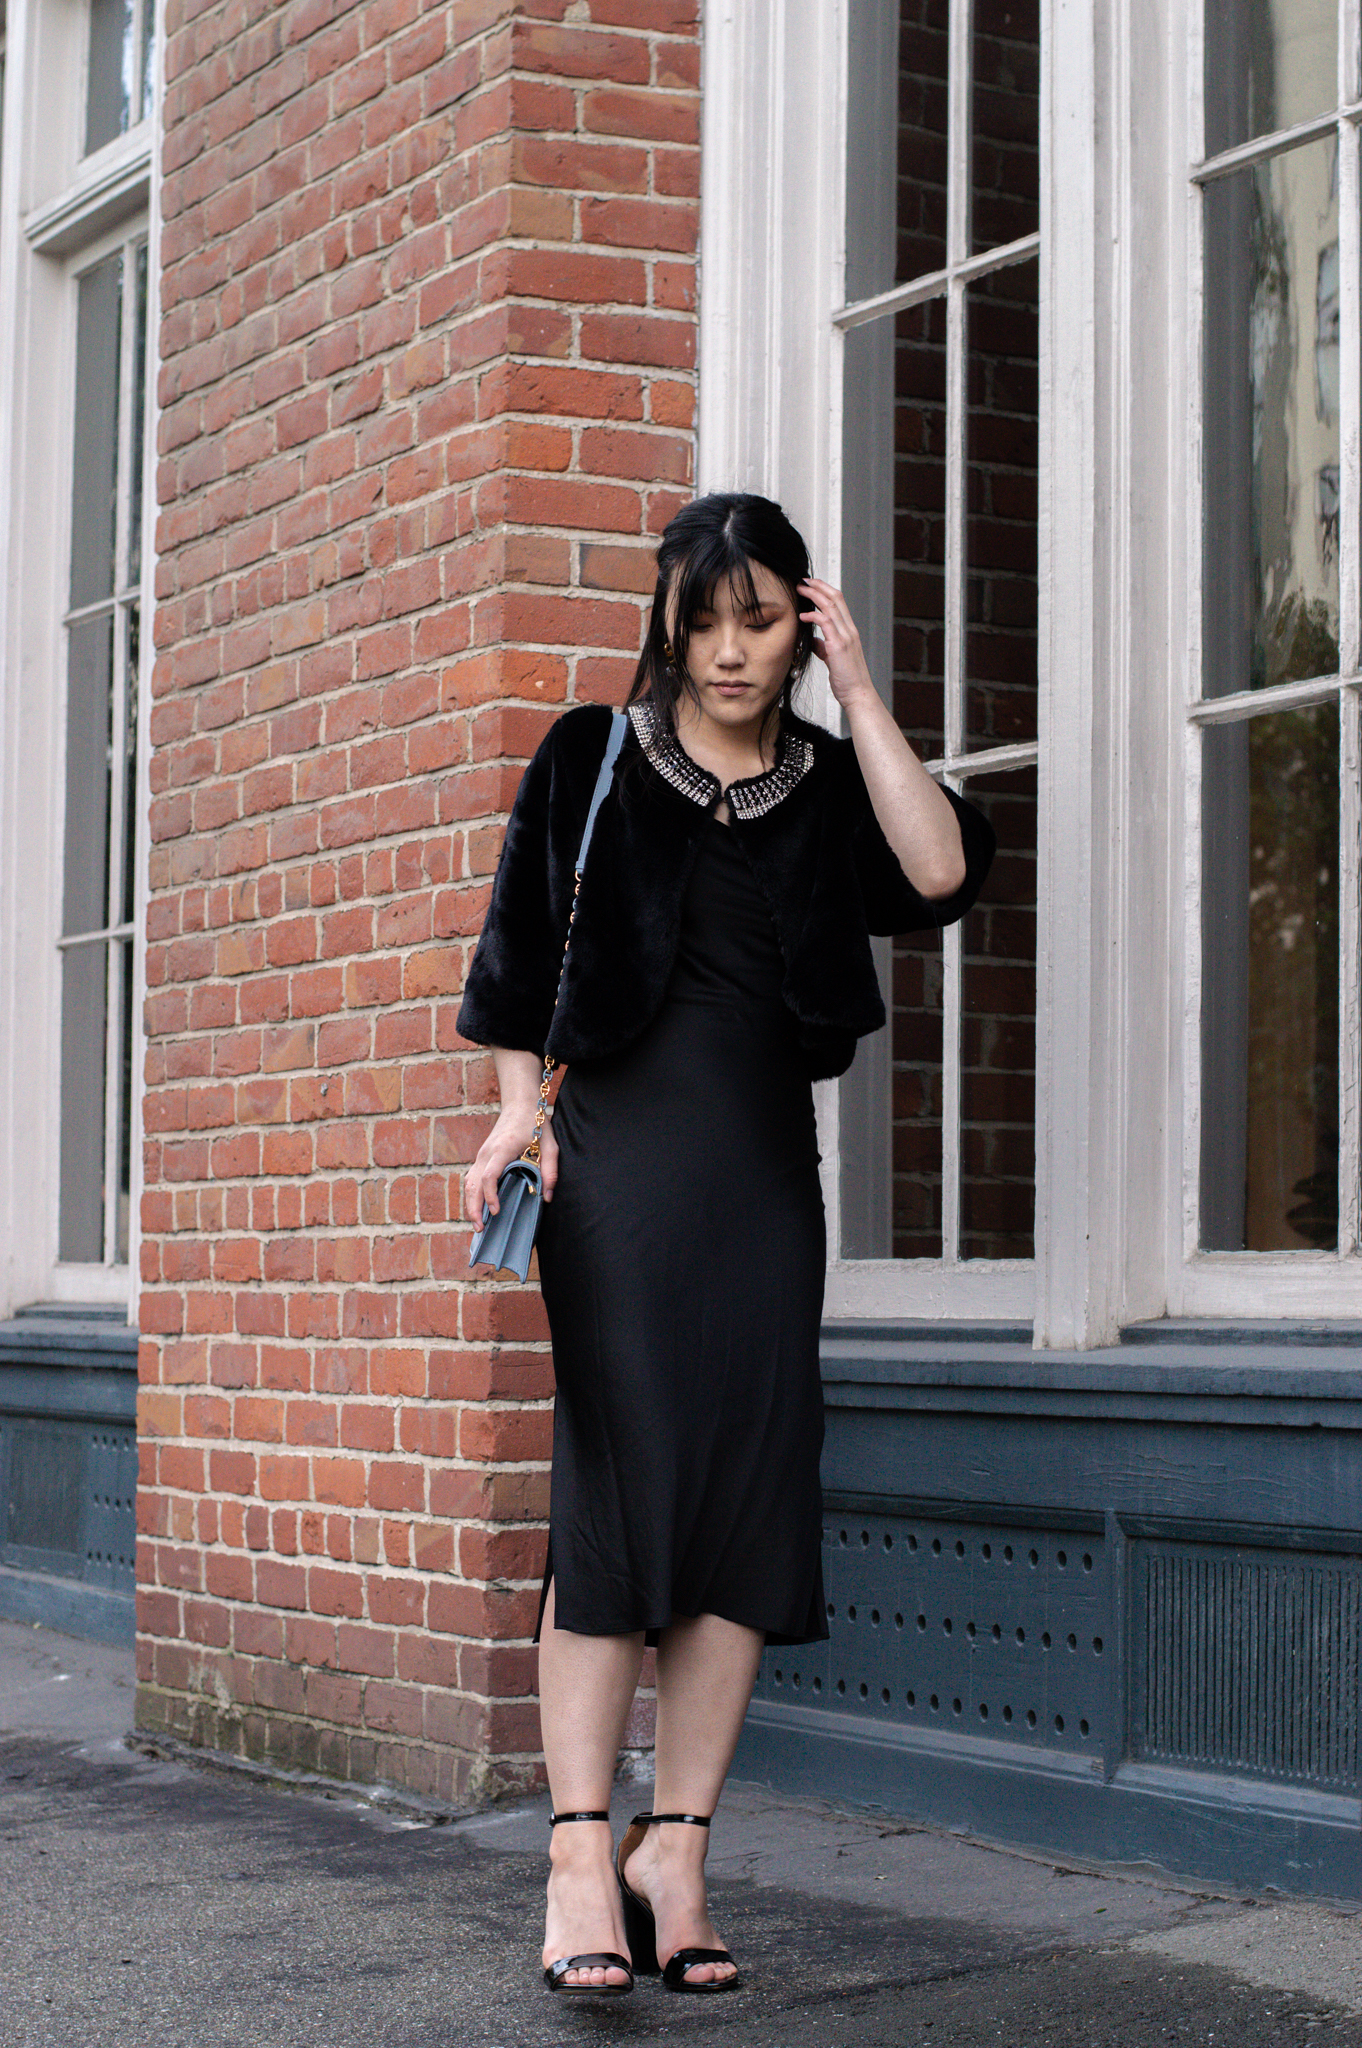 Capture of the fashion blogger's sophisticated outfit, ideal for dining at Niku Steakhouse in SF